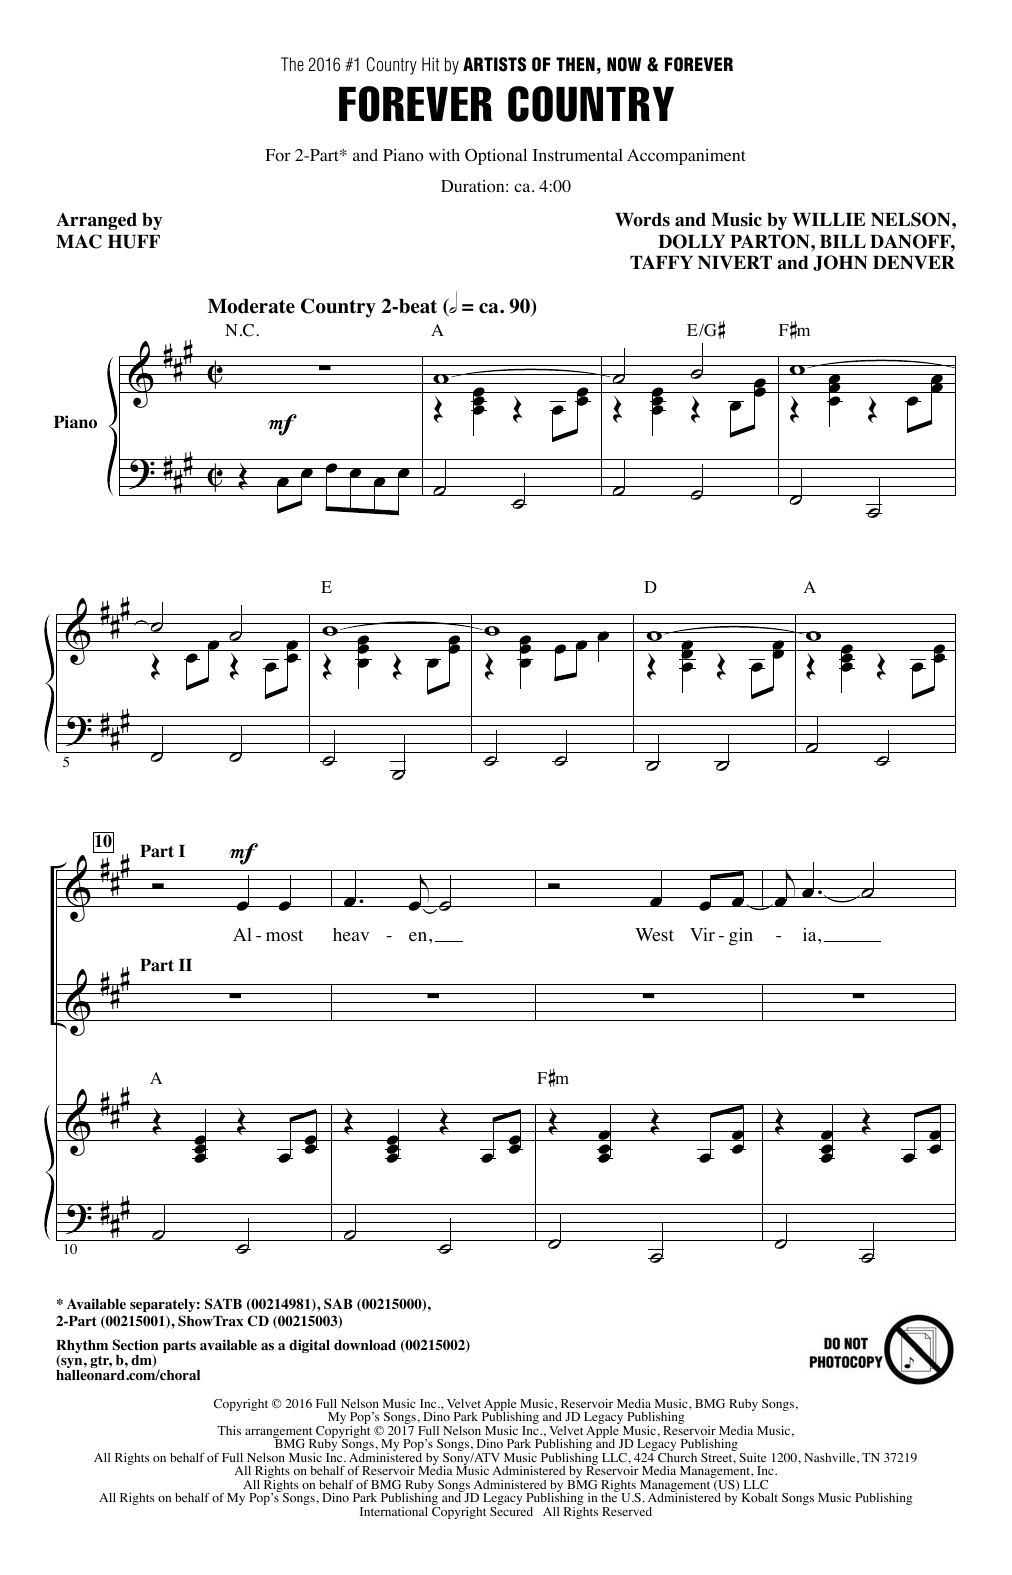 Artists of Then, Now & Forever Forever Country (arr. Mac Huff) sheet music notes and chords. Download Printable PDF.